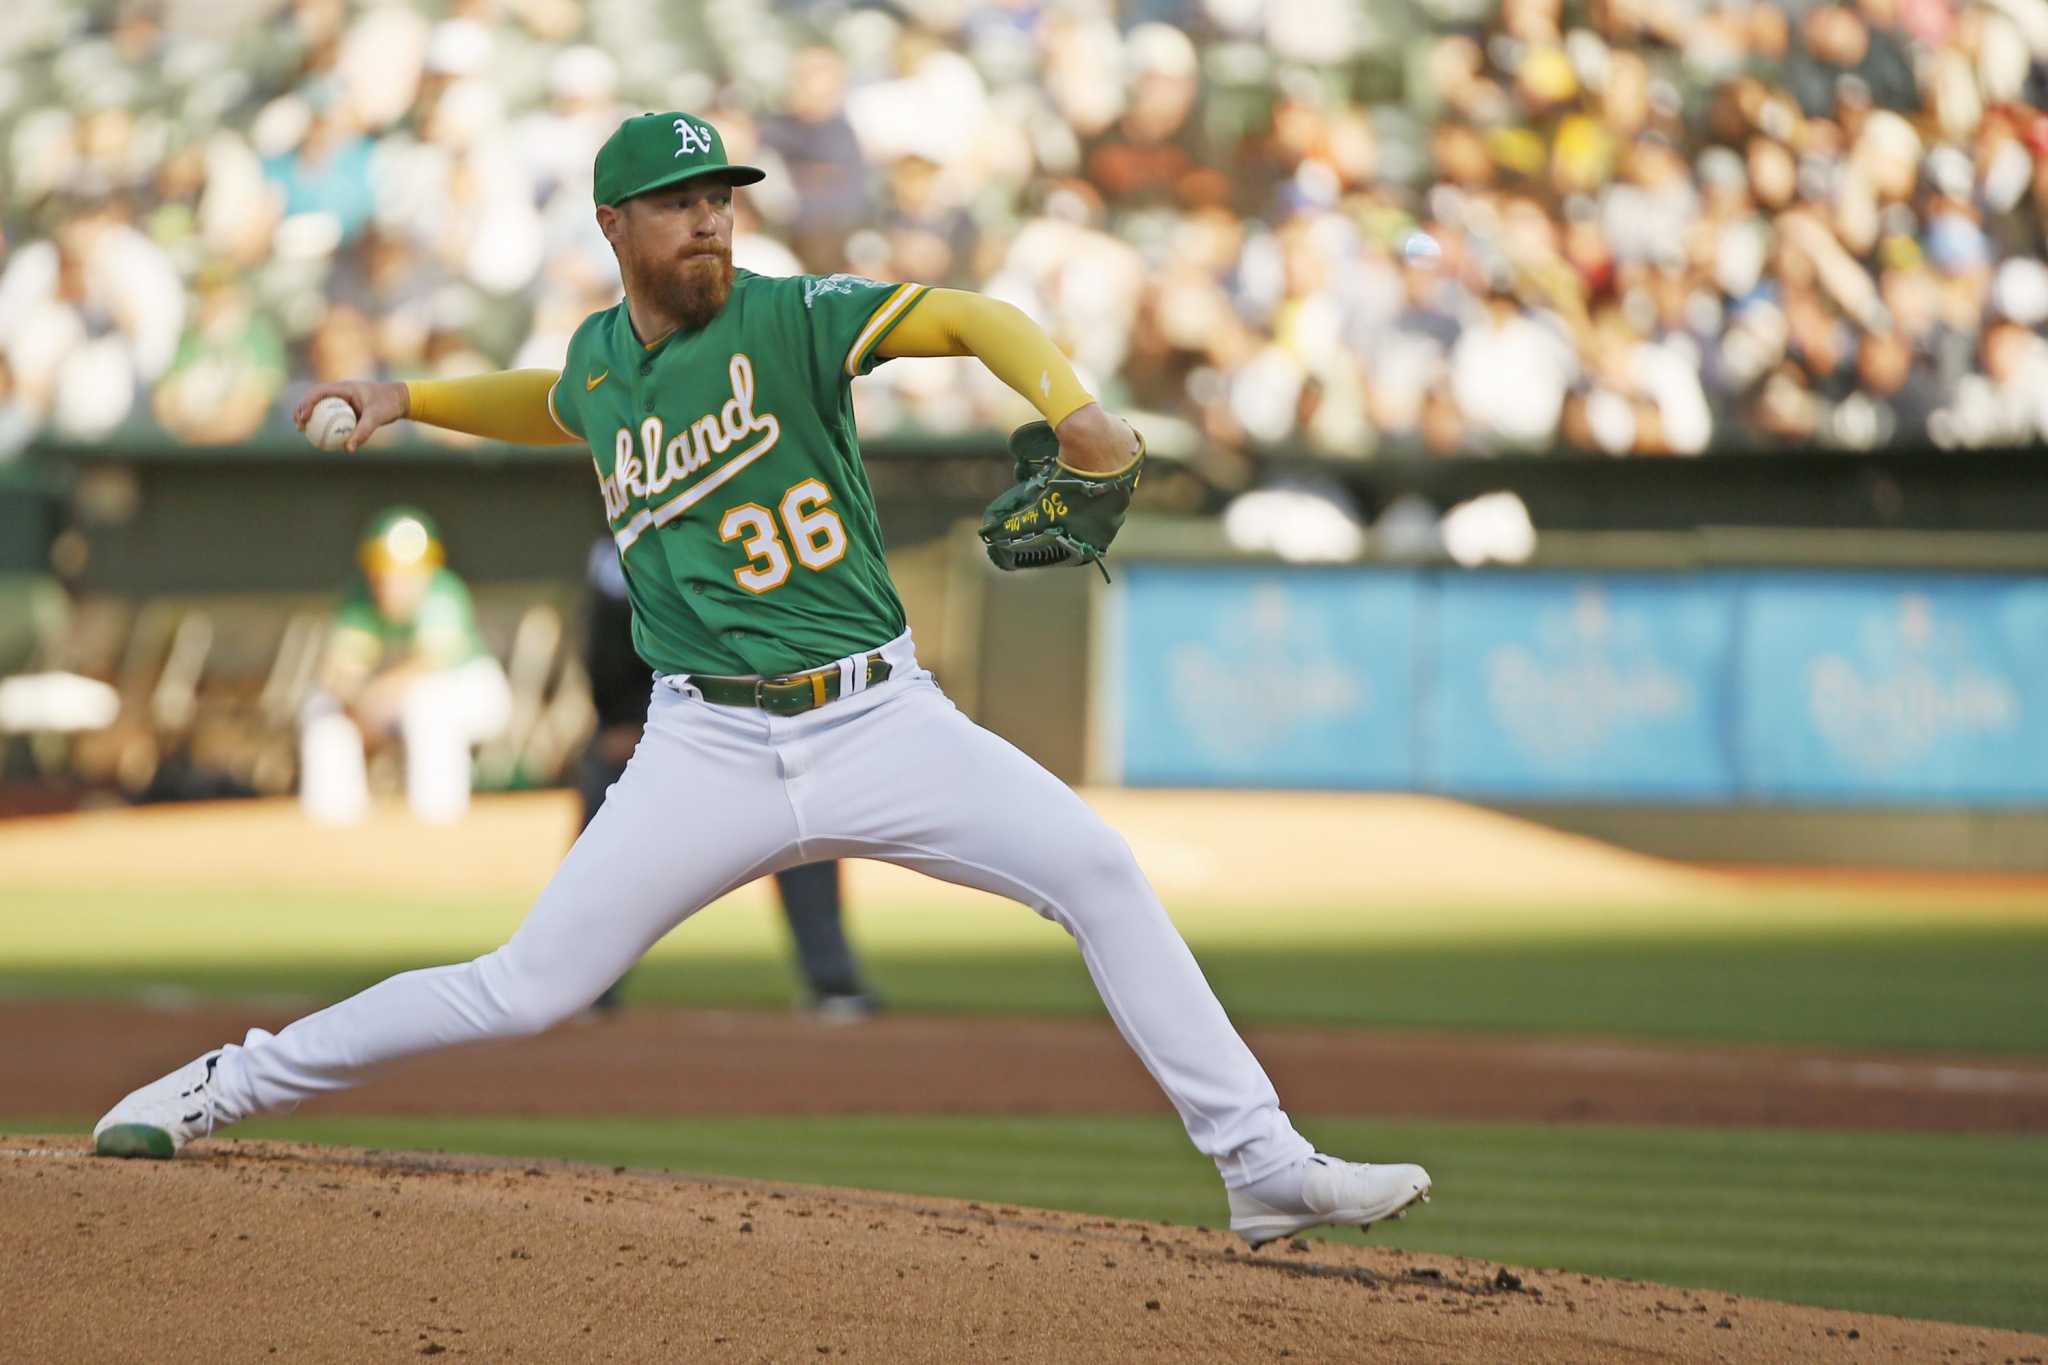 A's hold Yankees to 1 hit, win 3-2 in 11 on LeMahieu error